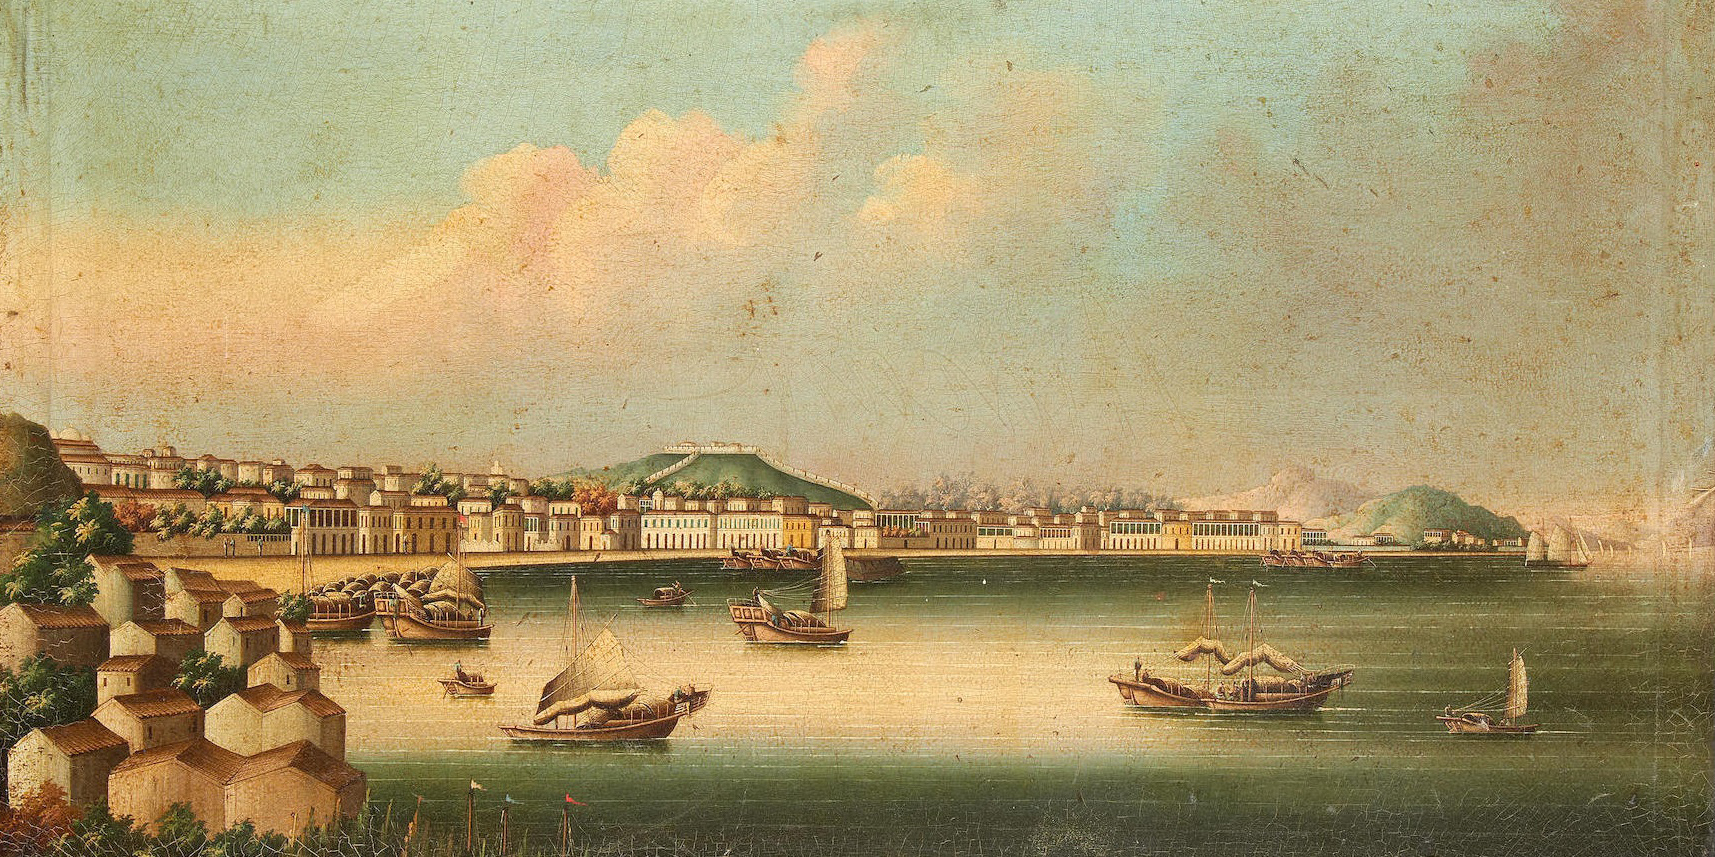 Oil painting of 19th-century Macao by unknown artist